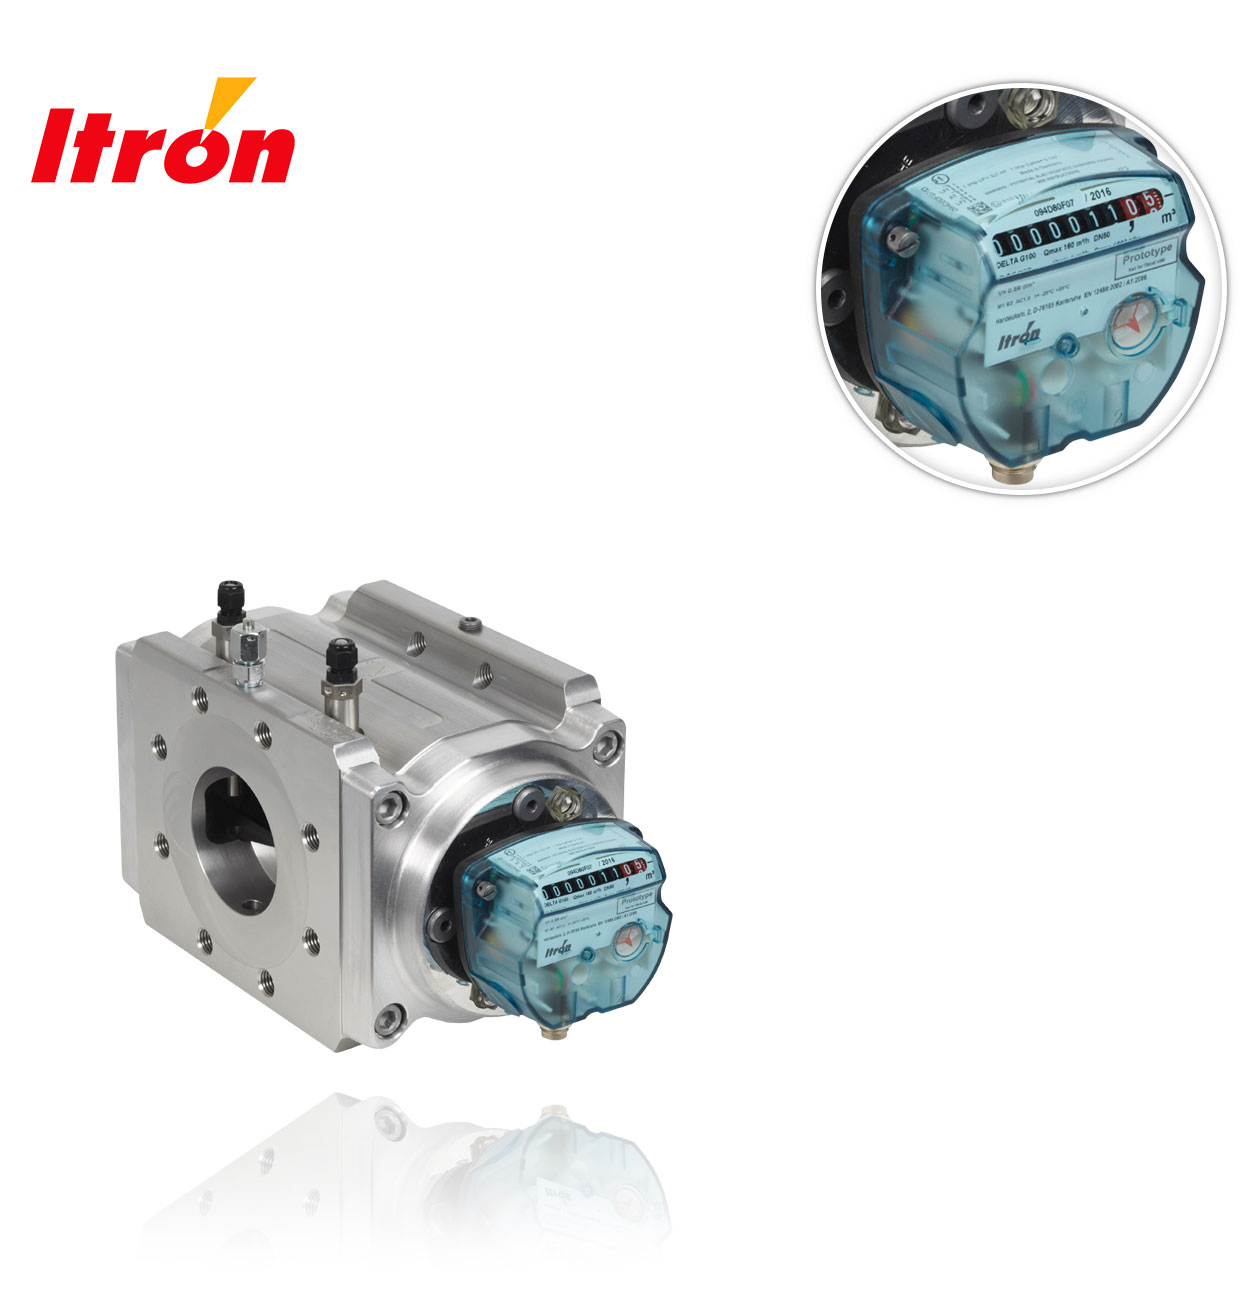 DELTA G250 DN80 maximum qty:400 DYNAMIC:130 LENGTH:241mm ITRON EXTENDED DYNAMIC ROTARY PISTON METER